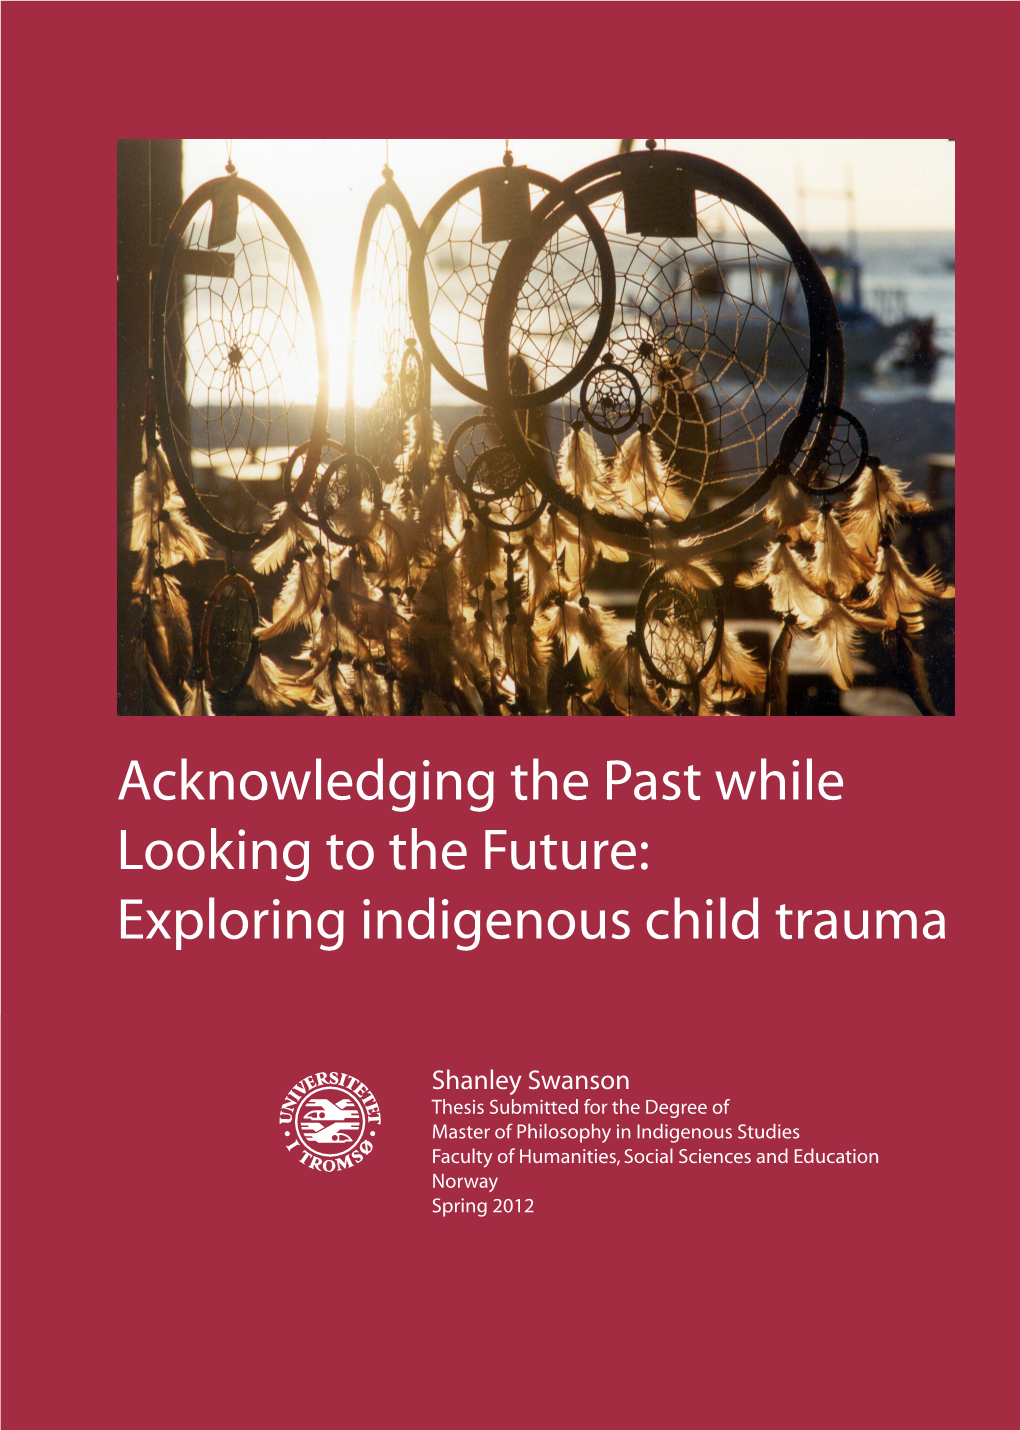 Acknowledging the Past While Looking to the Future: Exploring Indigenous Child Trauma